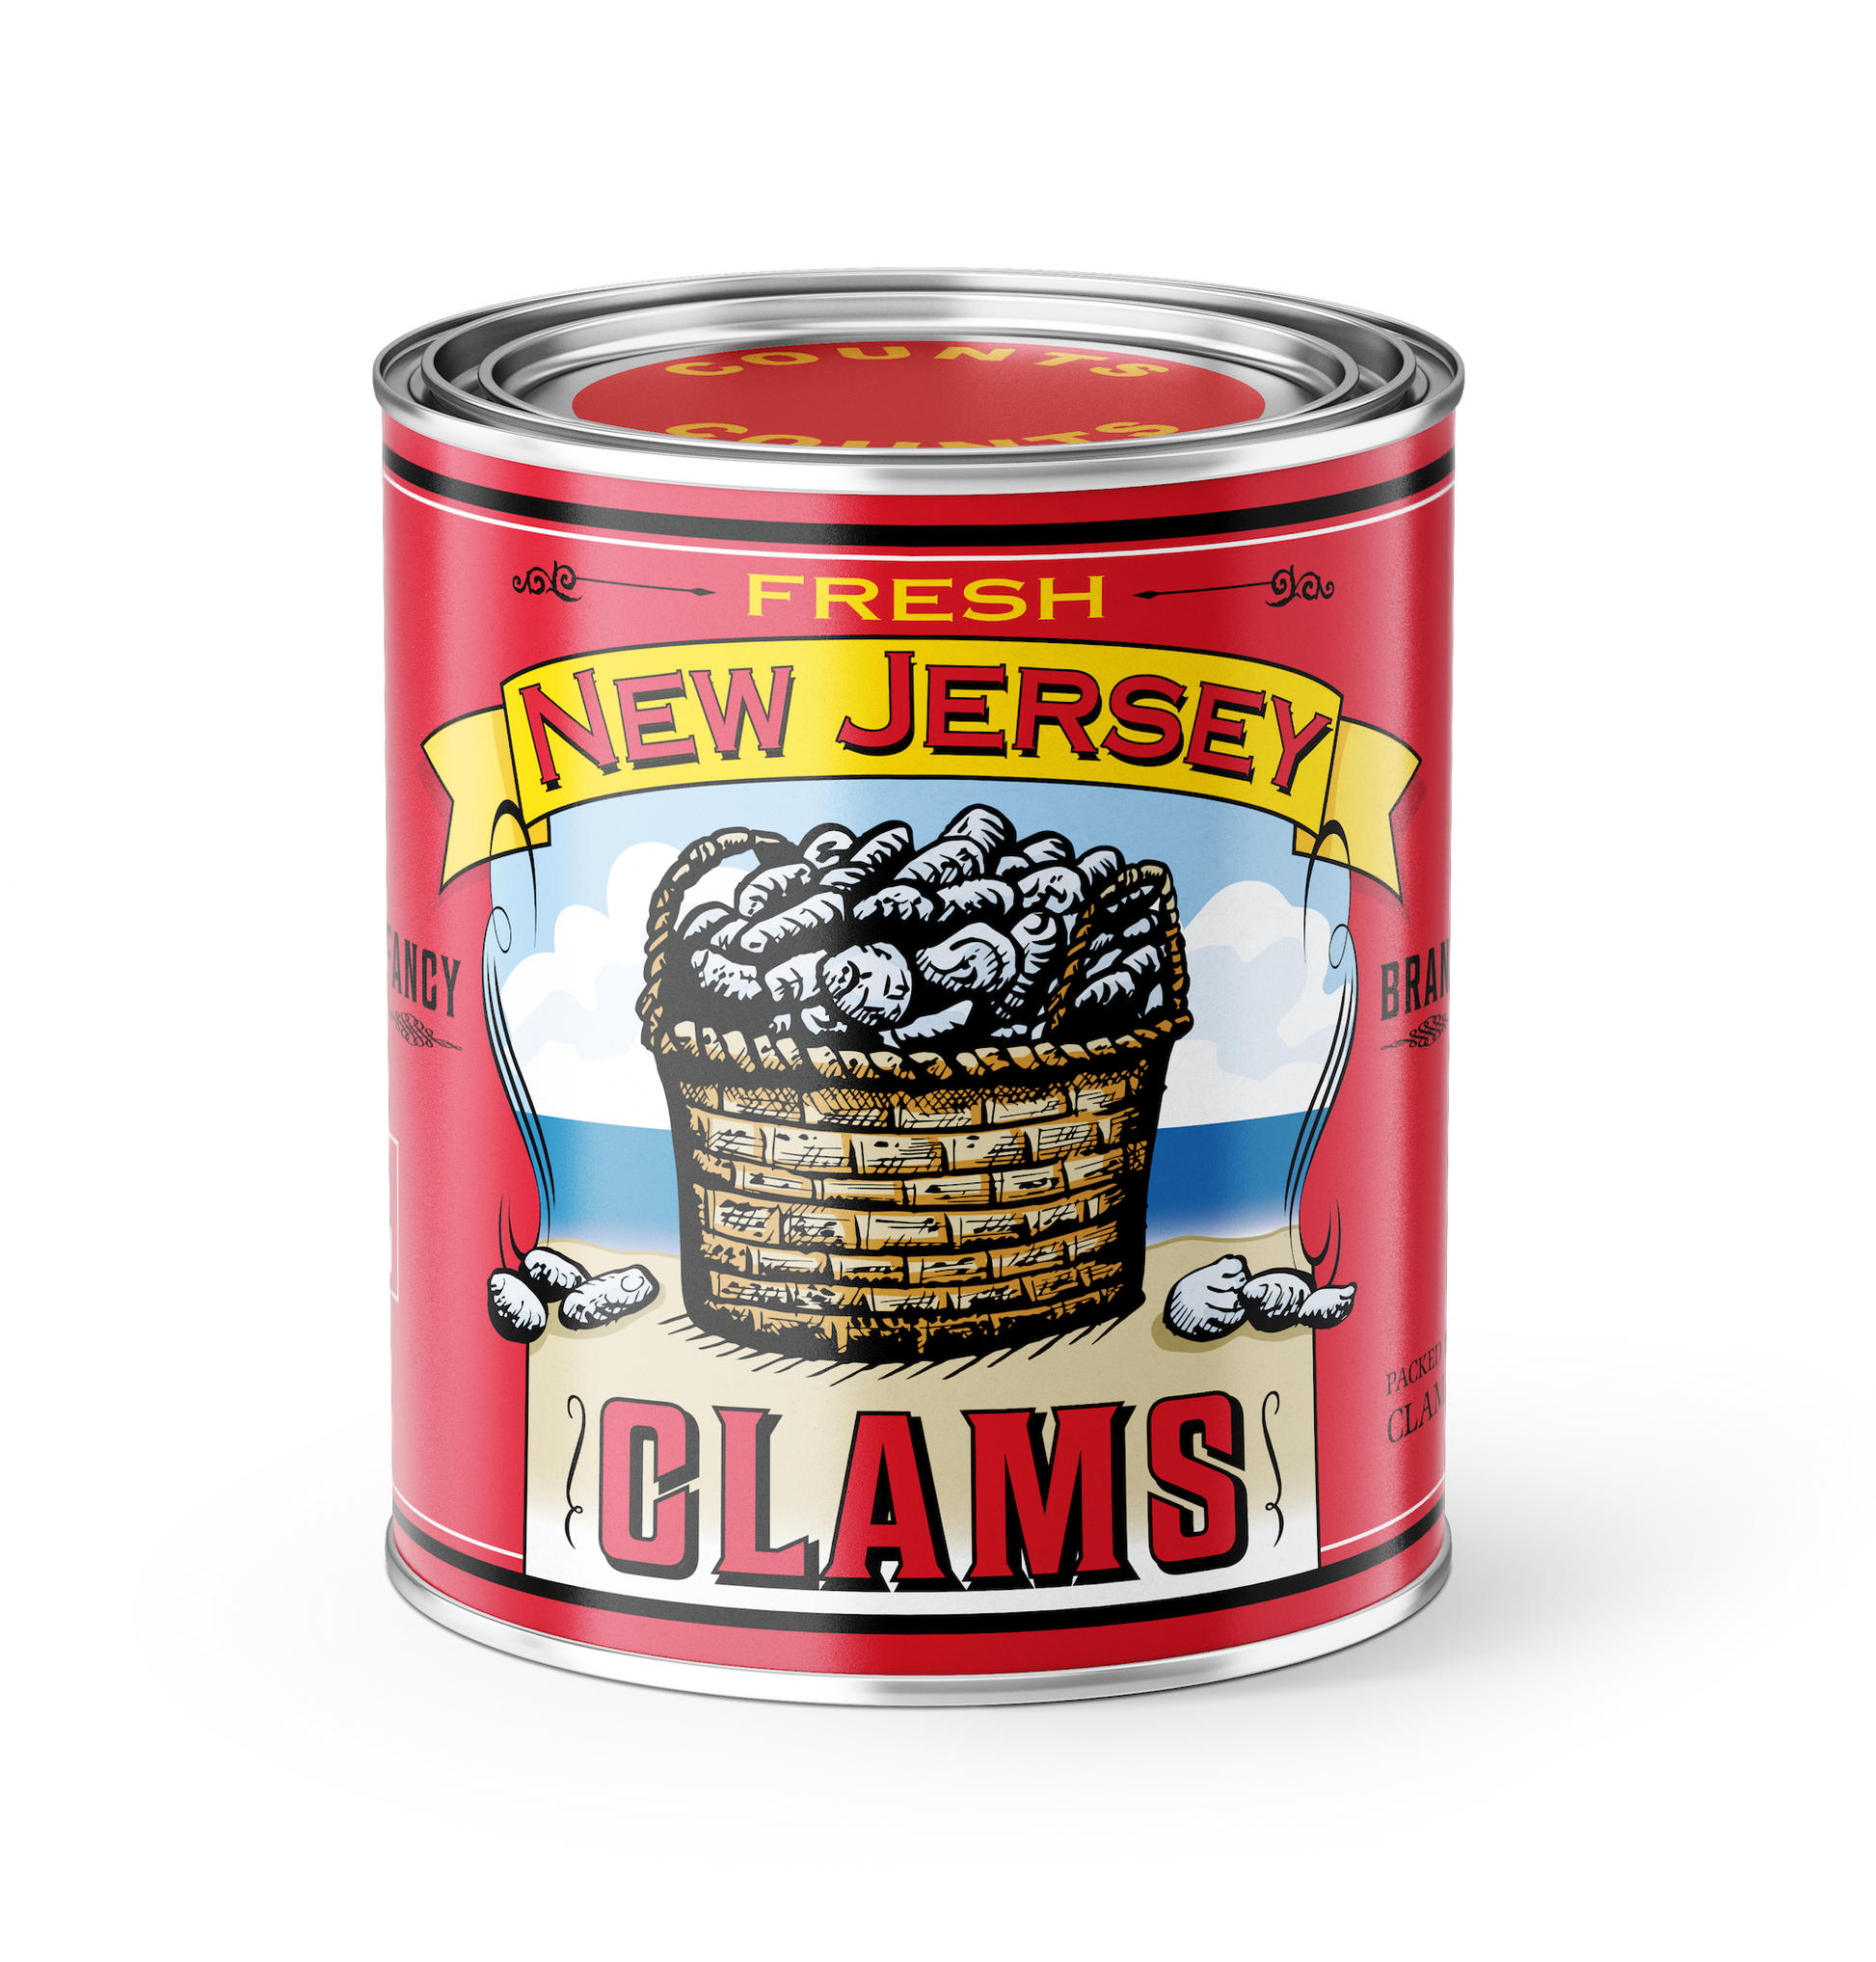 Vintage New Jersey Clams Candle